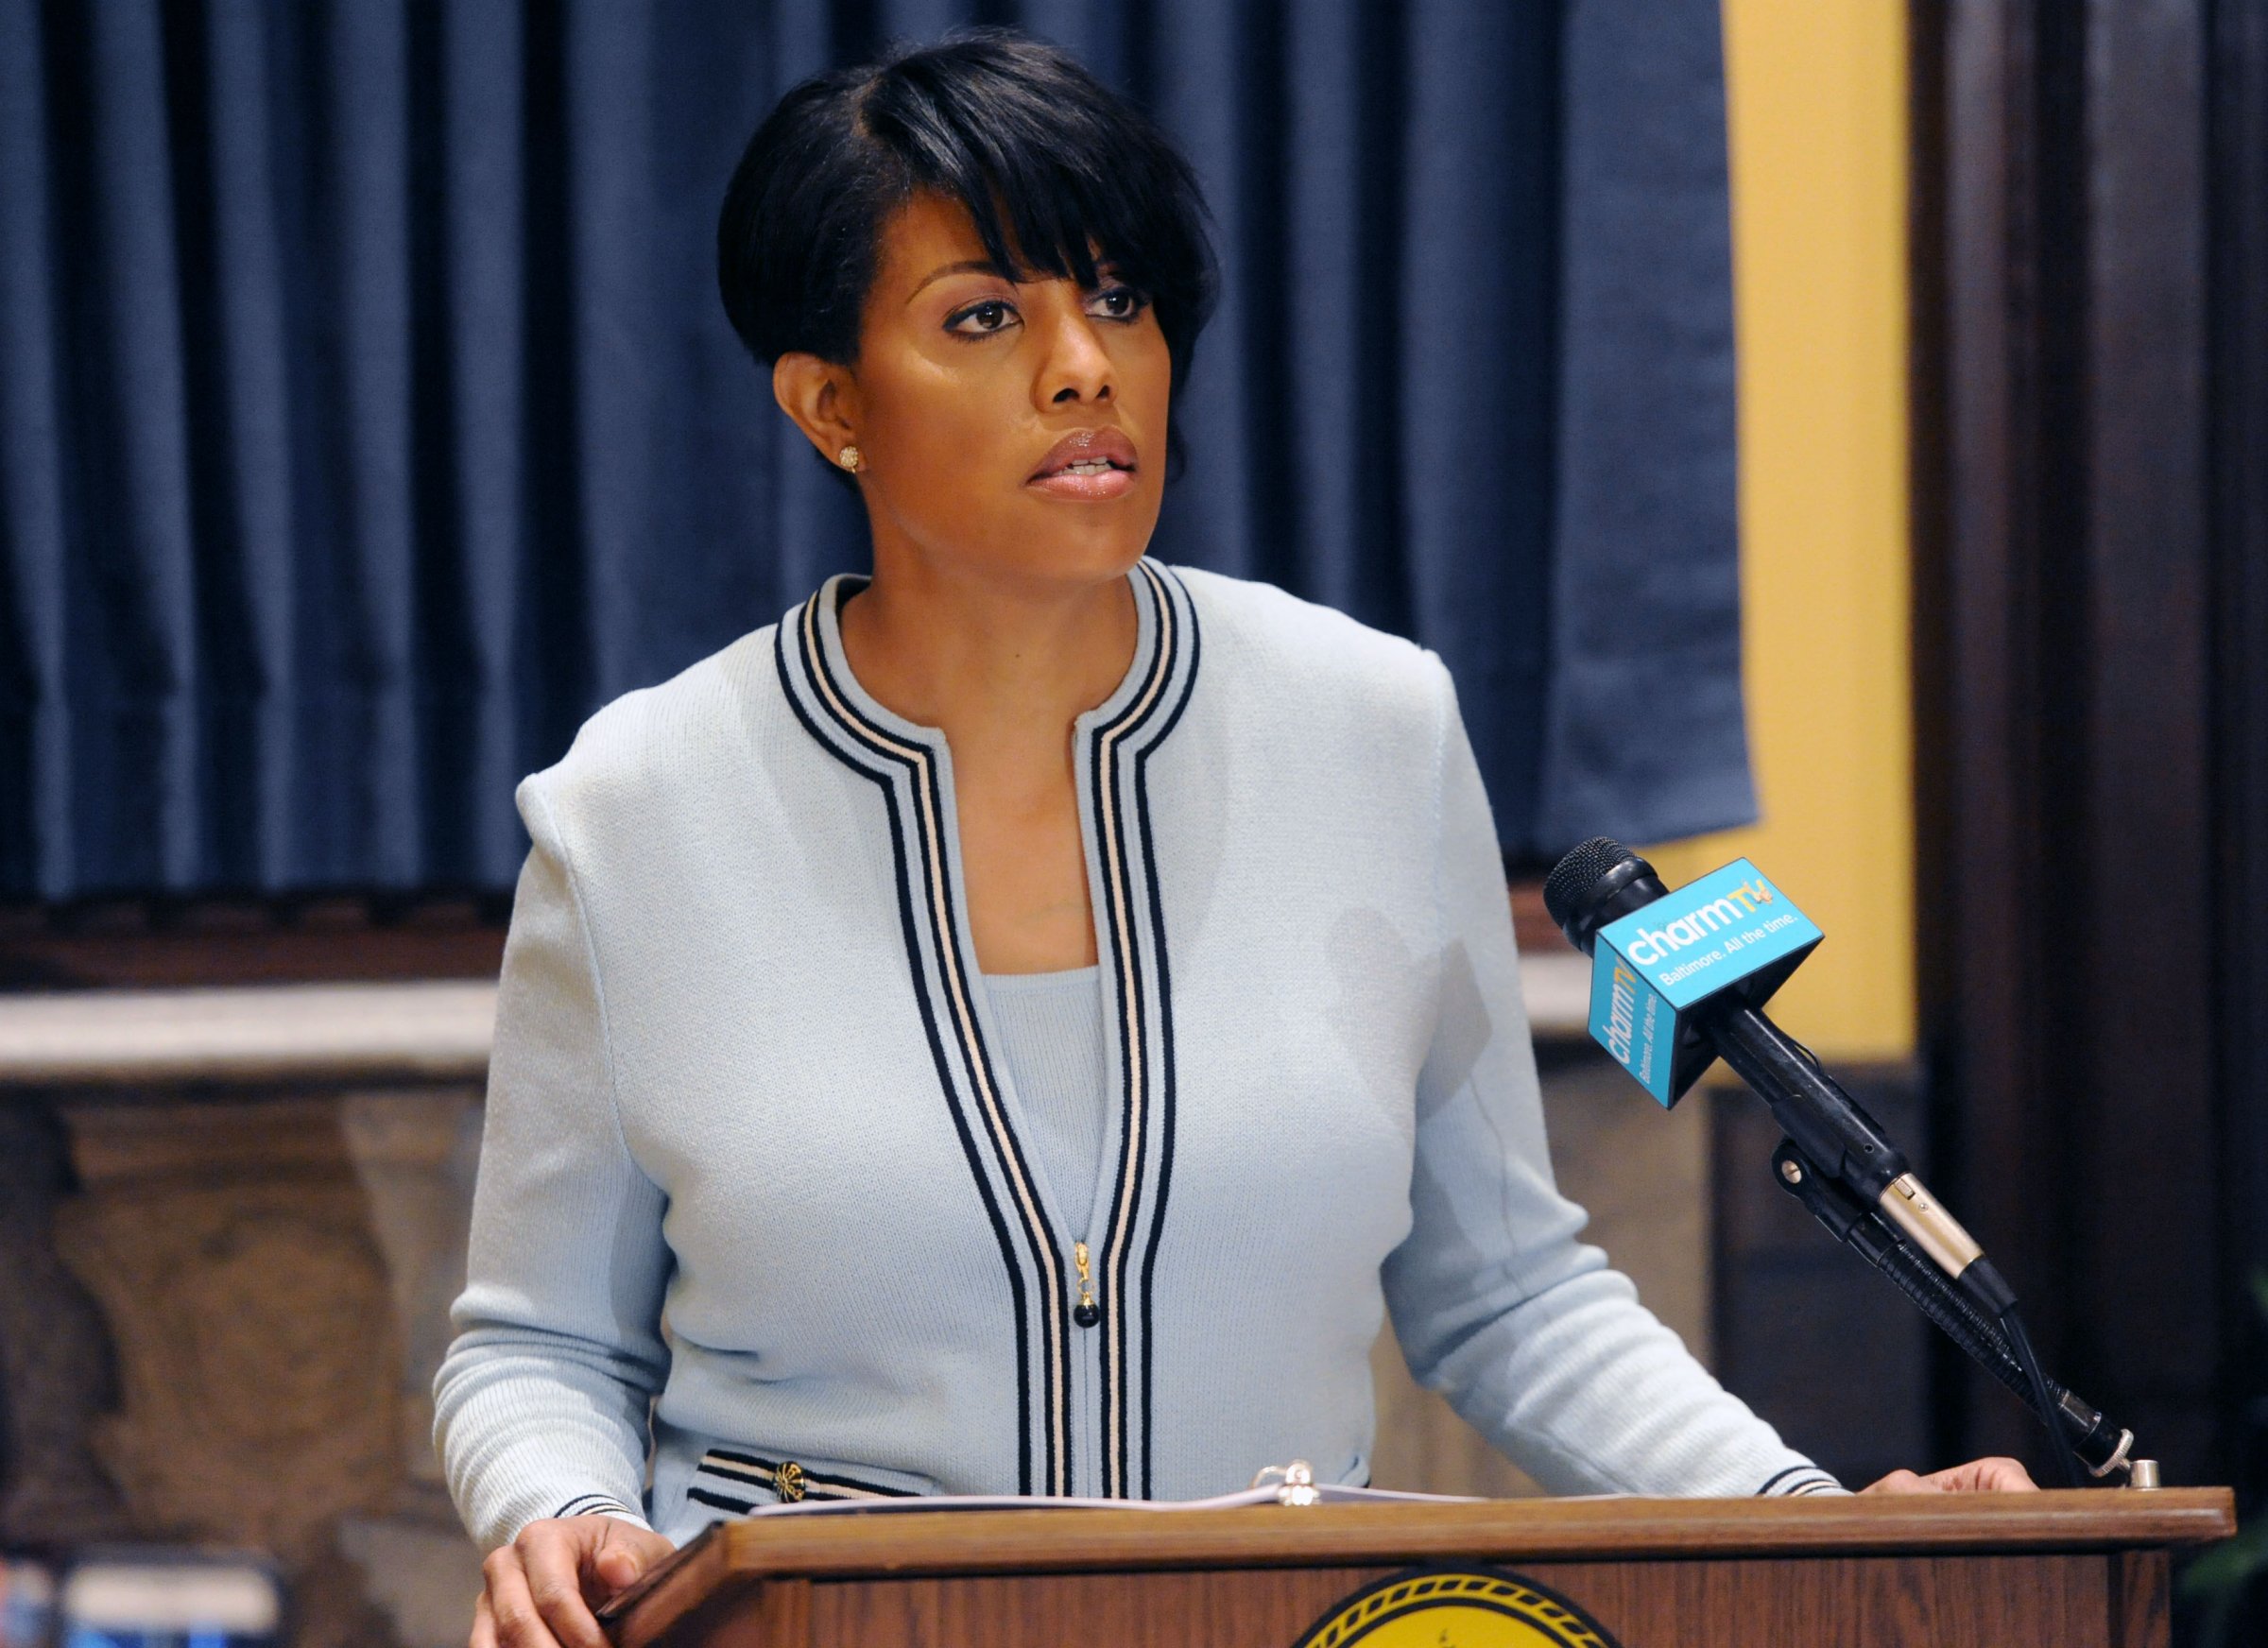 Mayor Stephanie Rawlings-Blake holds a news conference on Wednesday, May 6, 2015 in Baltimore.  The mayor called on U.S. government investigators to look into whether this city's beleaguered police department uses a pattern of excessive force or discriminatory policing. Rawlings-Blake's request came a day after new Attorney General Loretta Lynch visited the city and pledged to improve the police department.  (Kim Hairston/The Baltimore Sun via AP)  WASHINGTON EXAMINER OUT